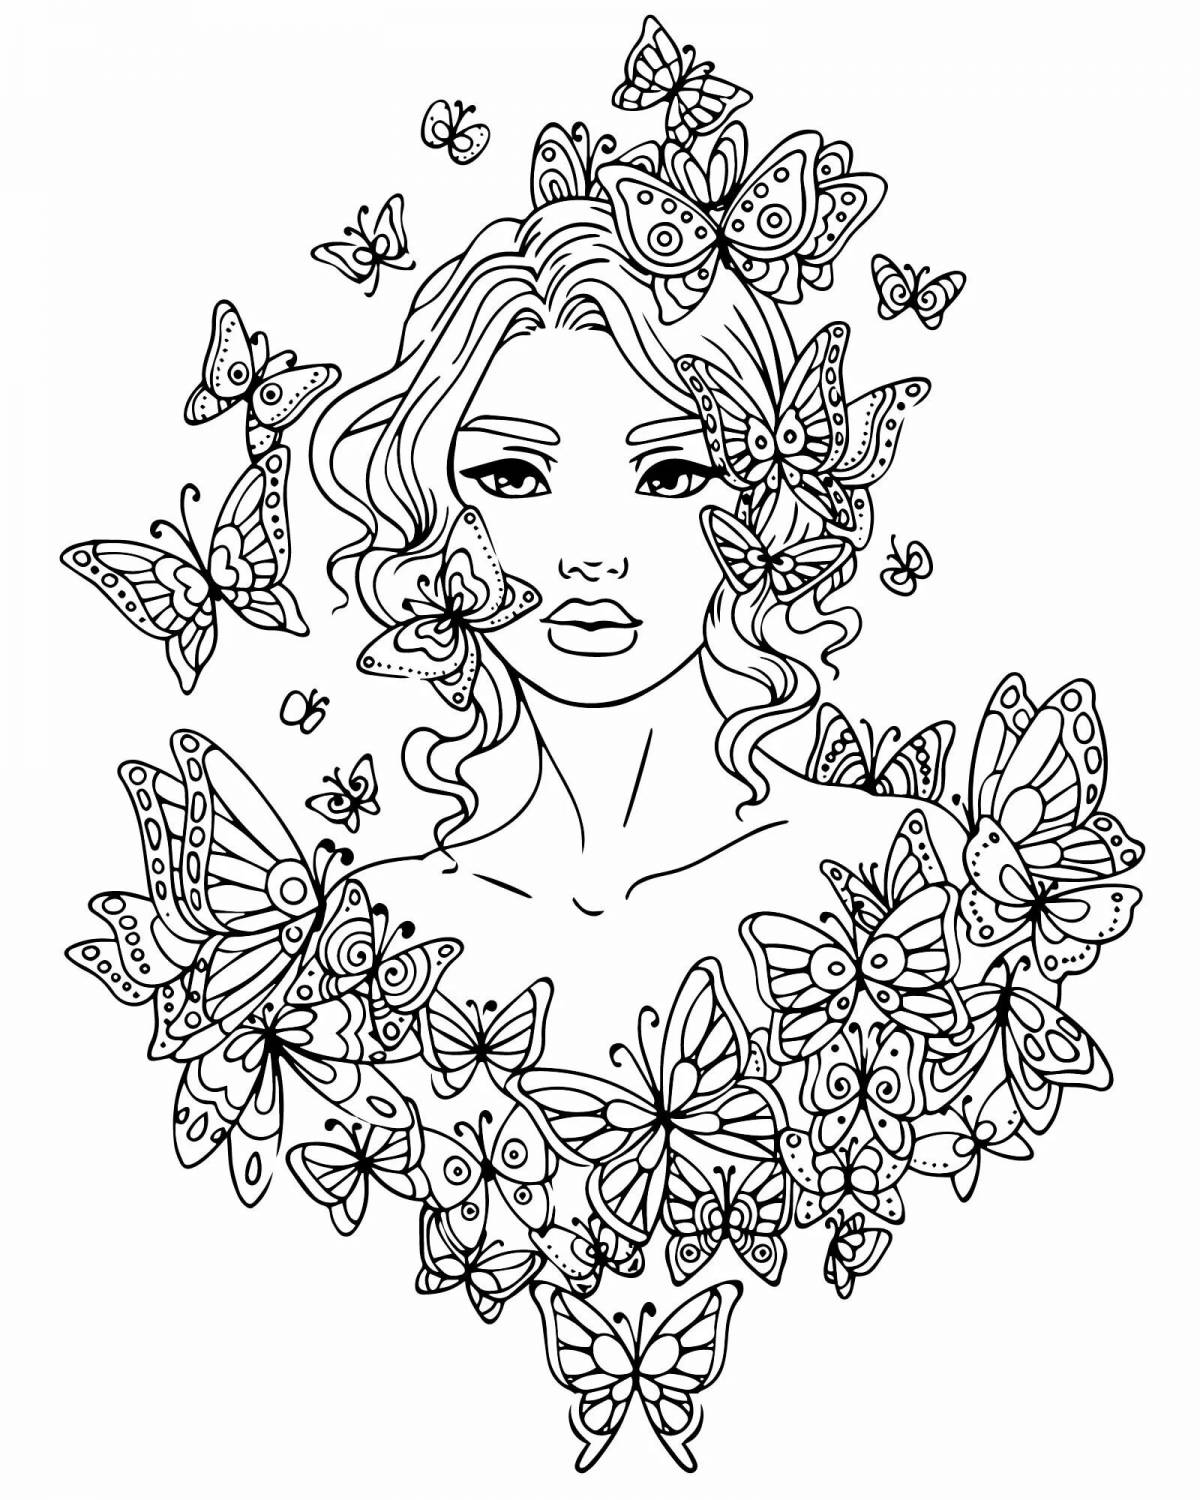 Exciting anti-stress coloring book for girls 10-12 years old